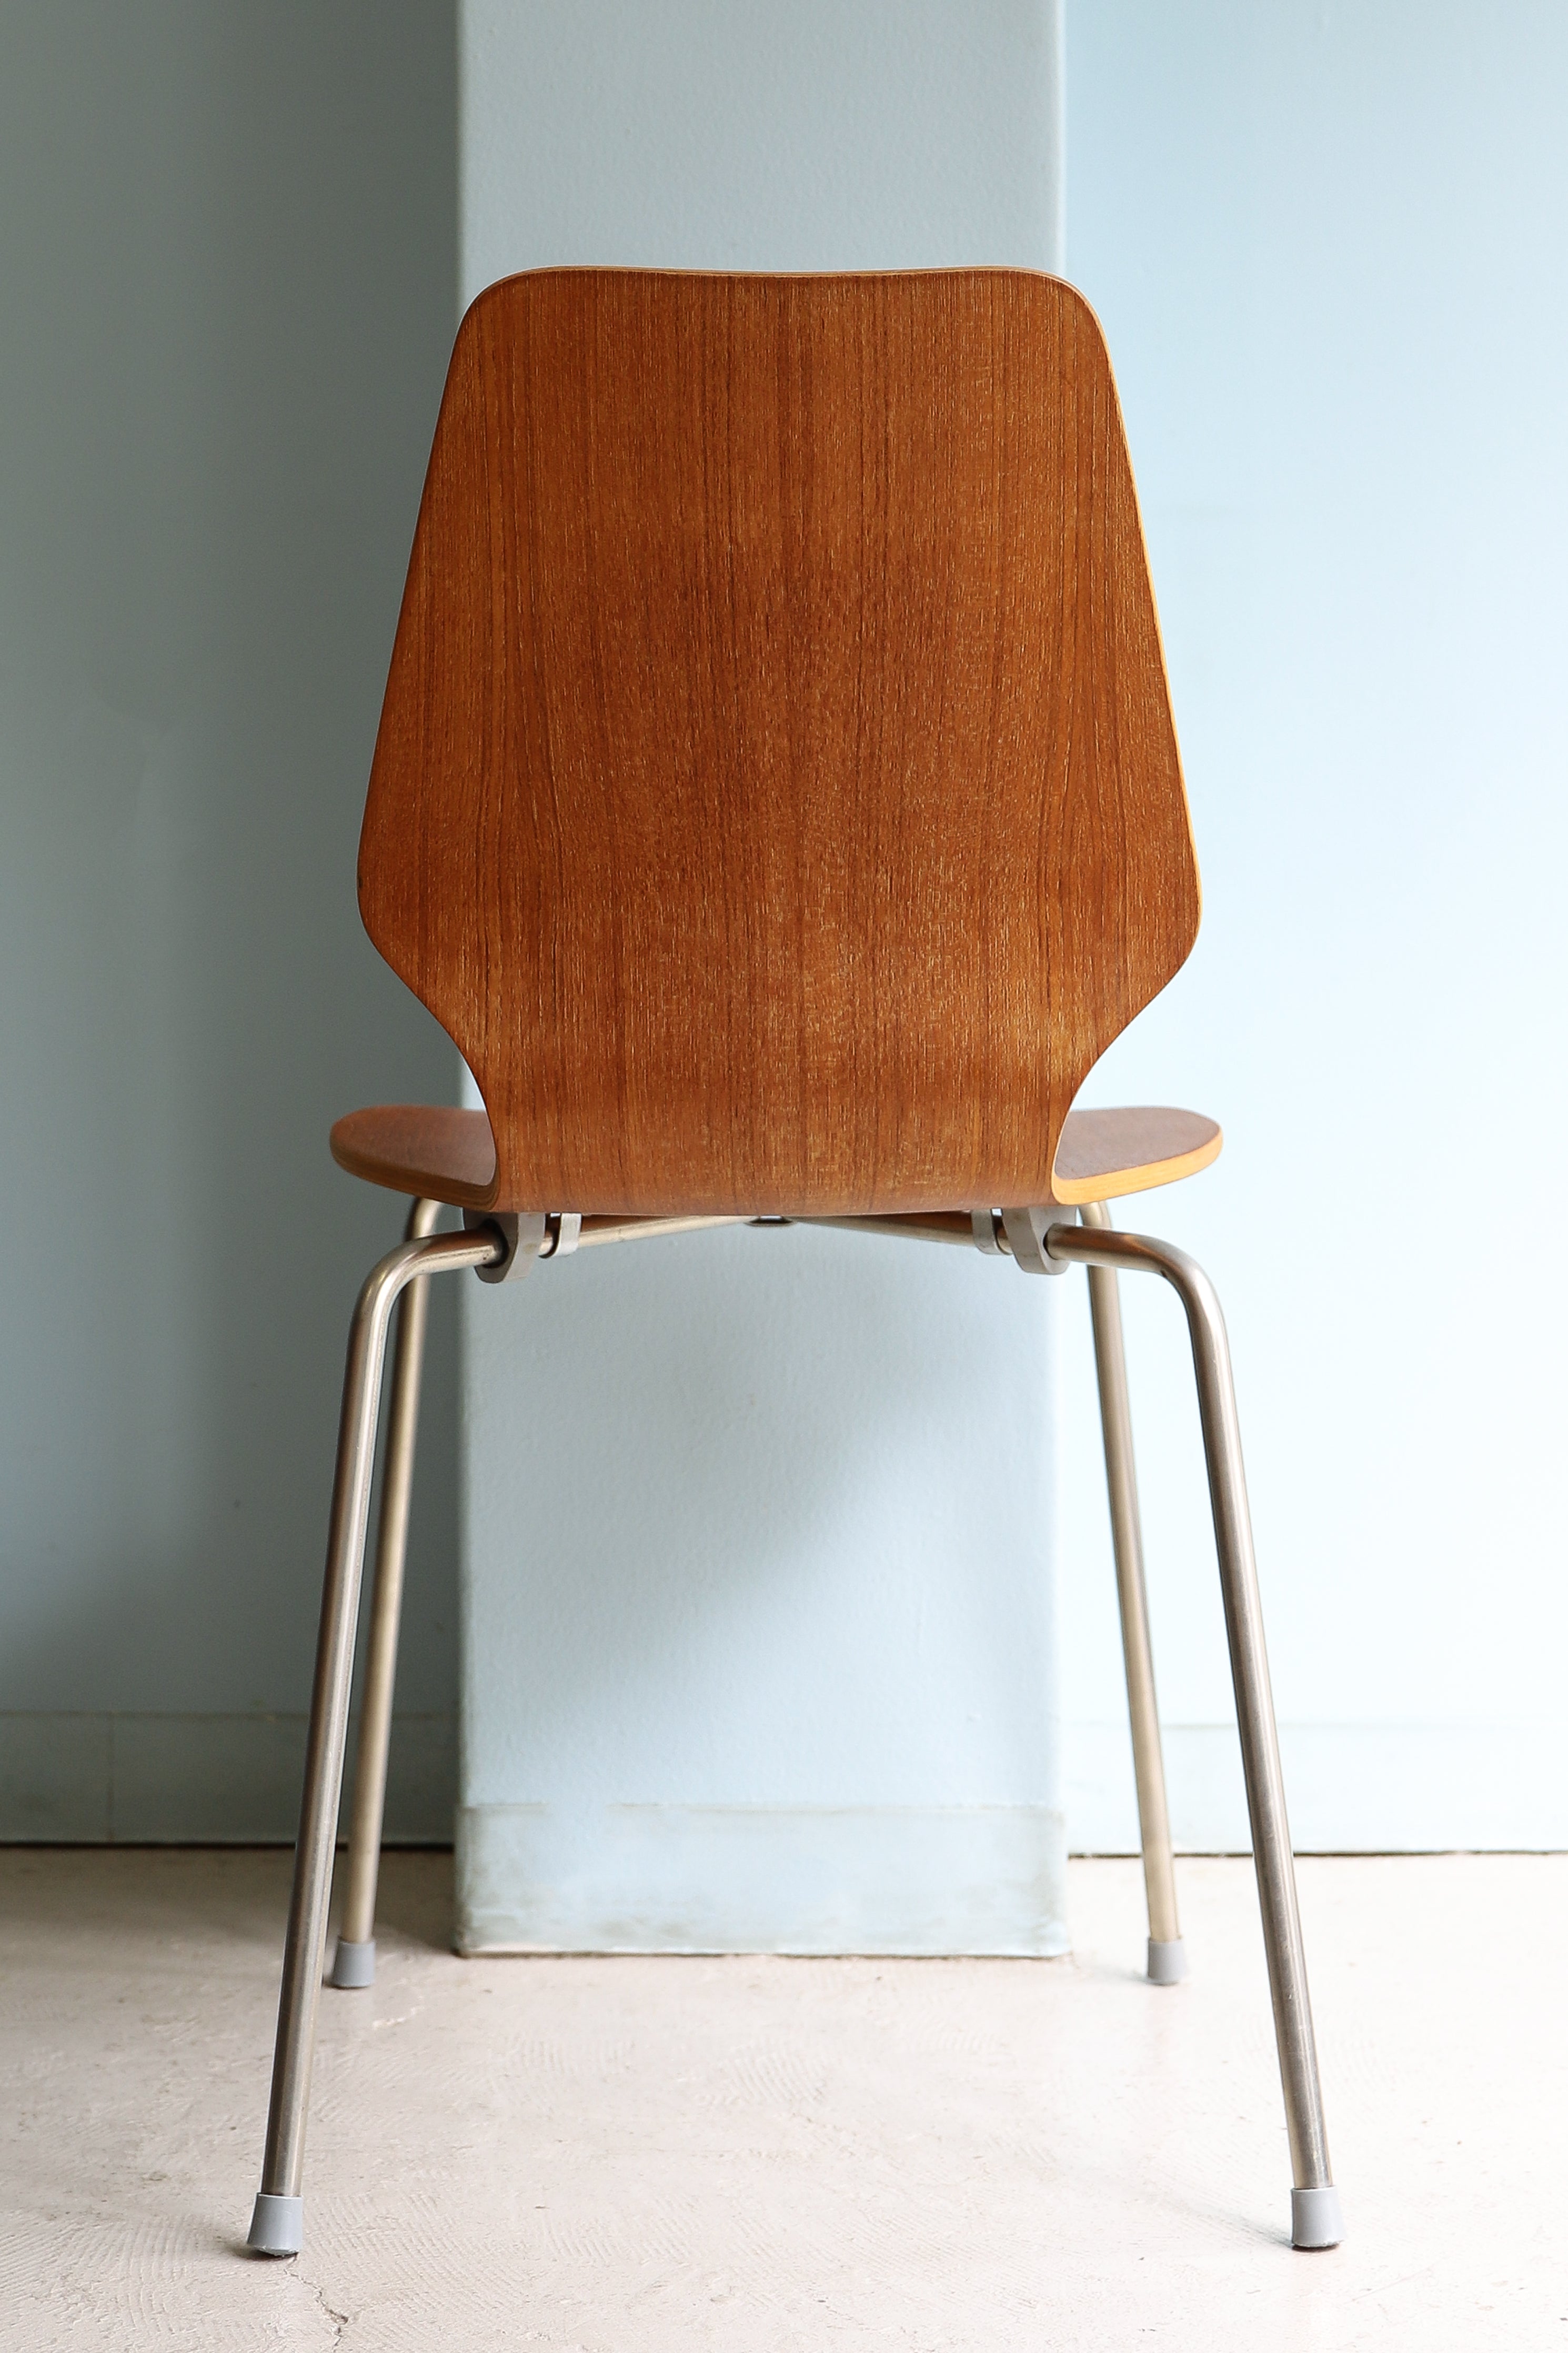 Teak Plywood Stacking Chair Danish Vintage/デンマークヴィンテージ スタッキングチェア チーク プライウッド 椅子 北欧家具